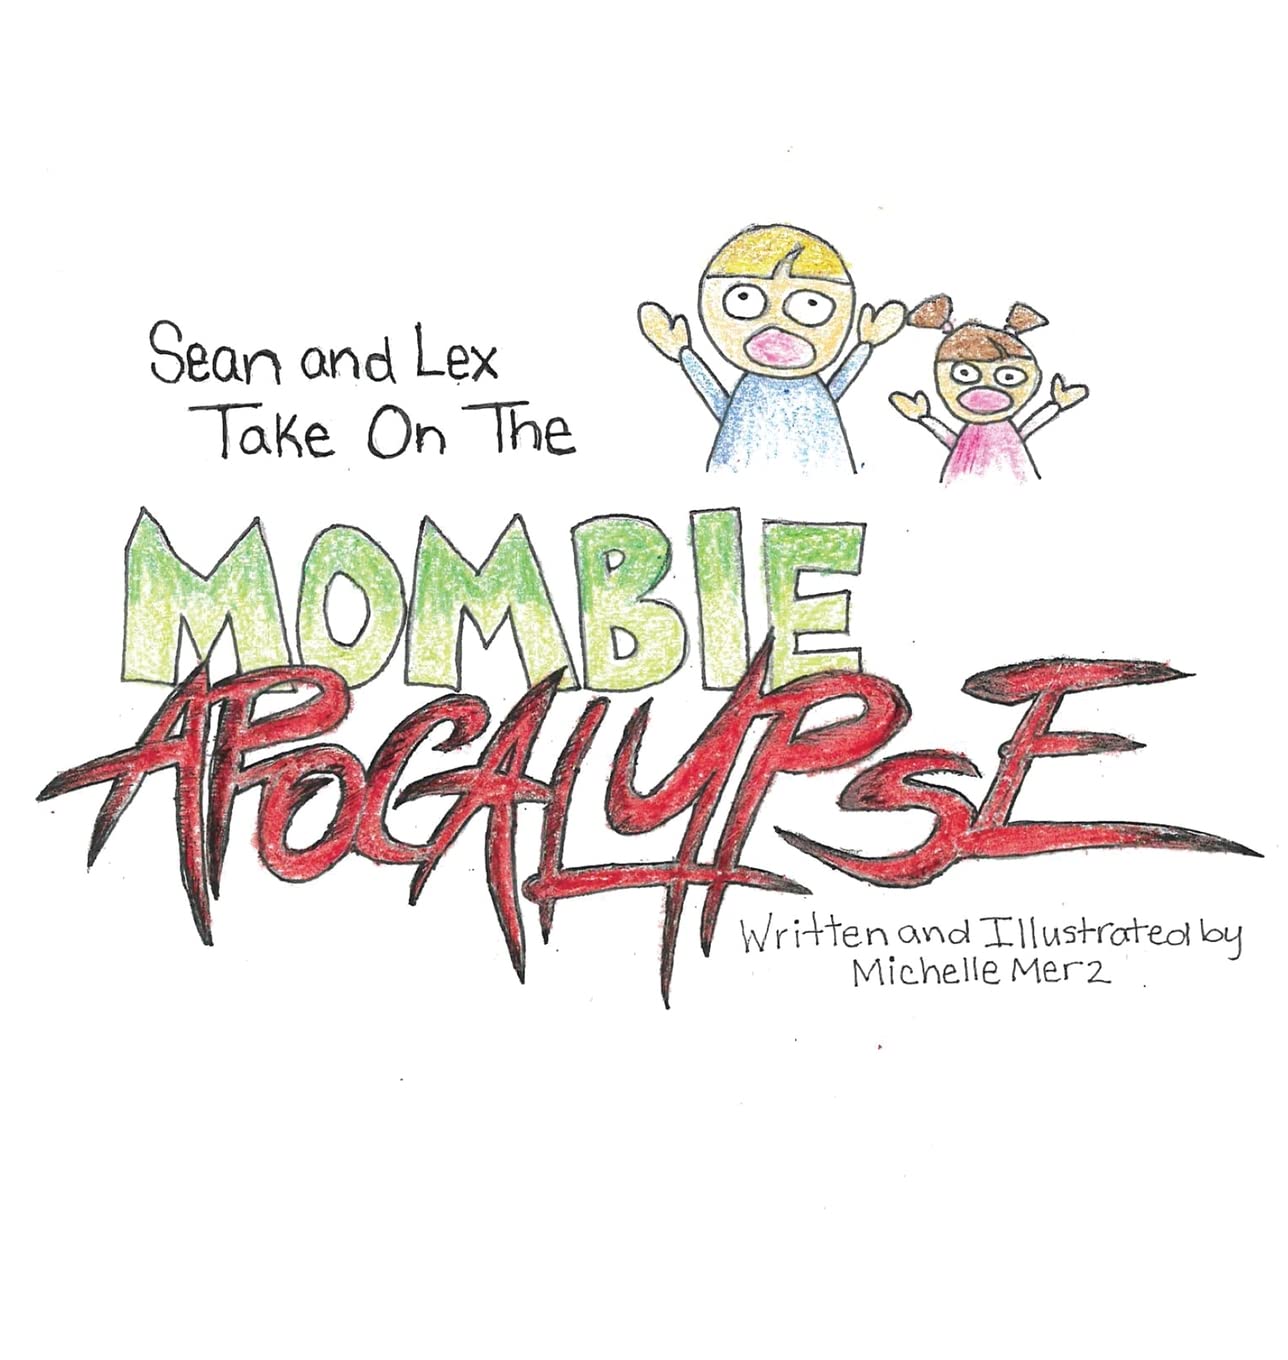 "Sean and Lex Take on the Mombie Apocalypse" Will Send Readers into Fits of Laughter with Its Hilarious Storytelling